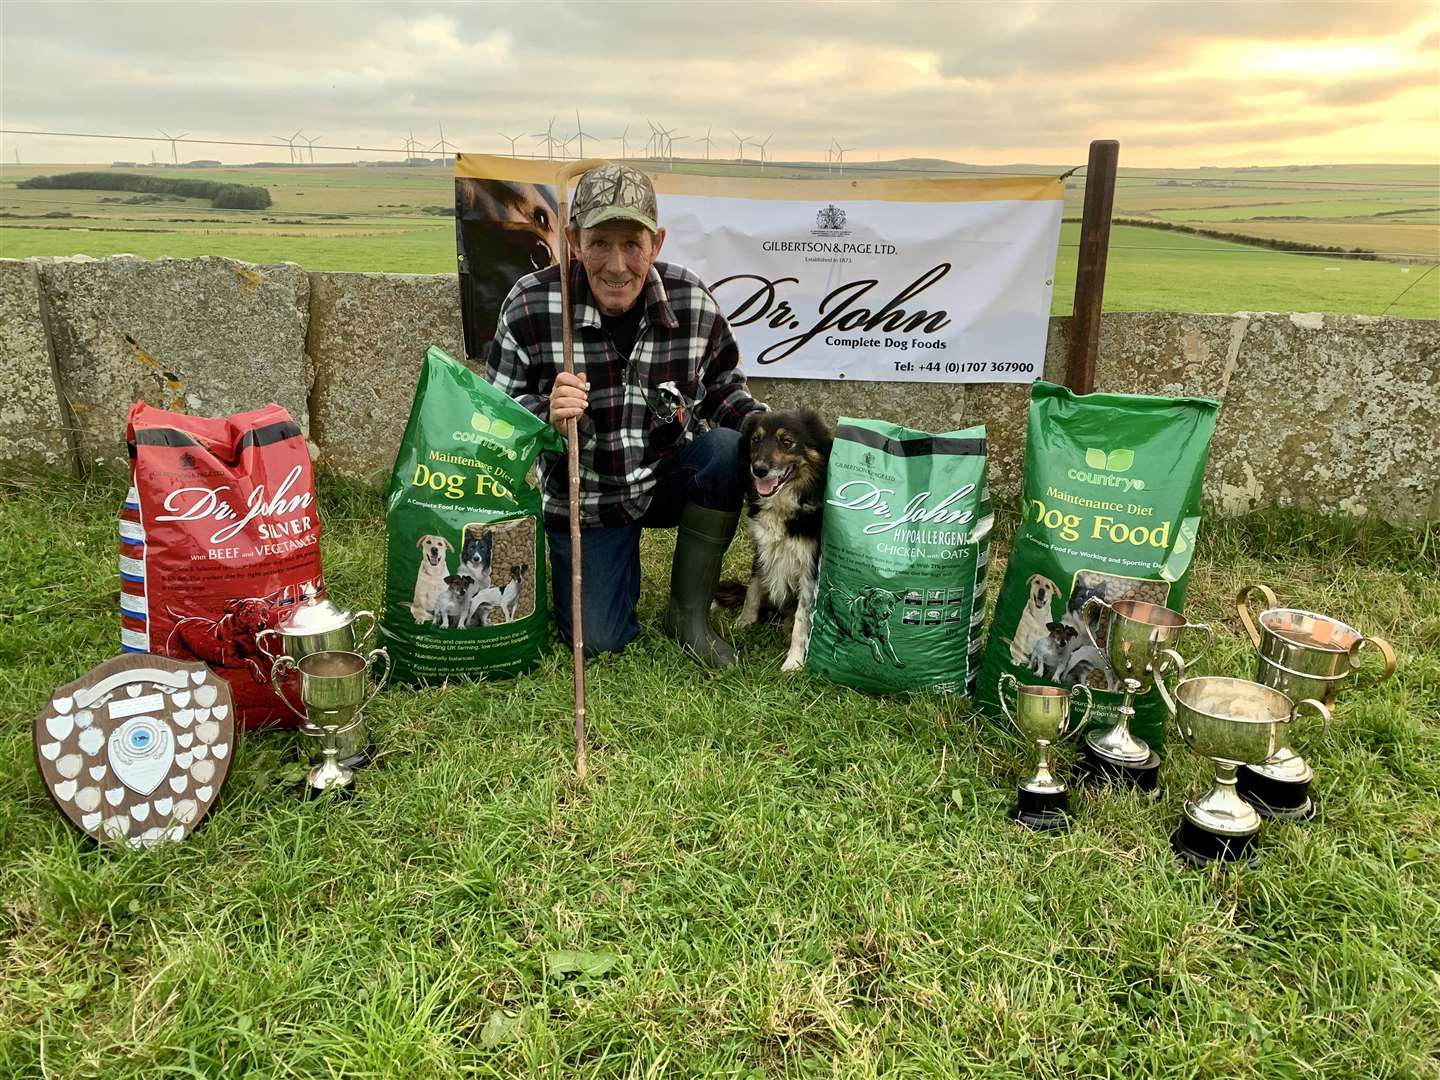 Michael Shearer and Tib with some of the trophies and prizes from the local trials.